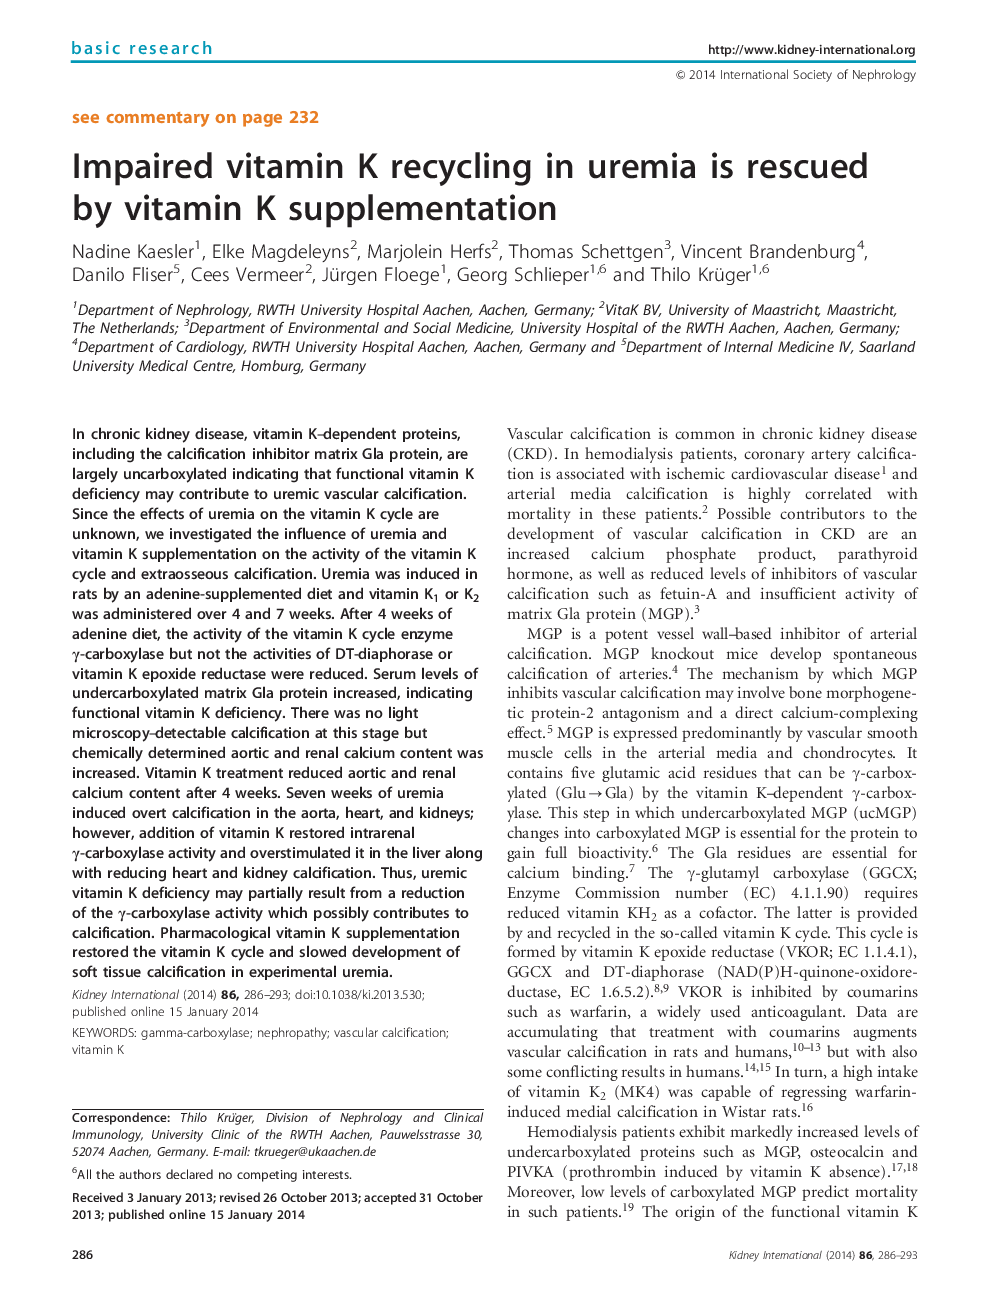 Impaired vitamin K recycling in uremia is rescued by vitamin K supplementation